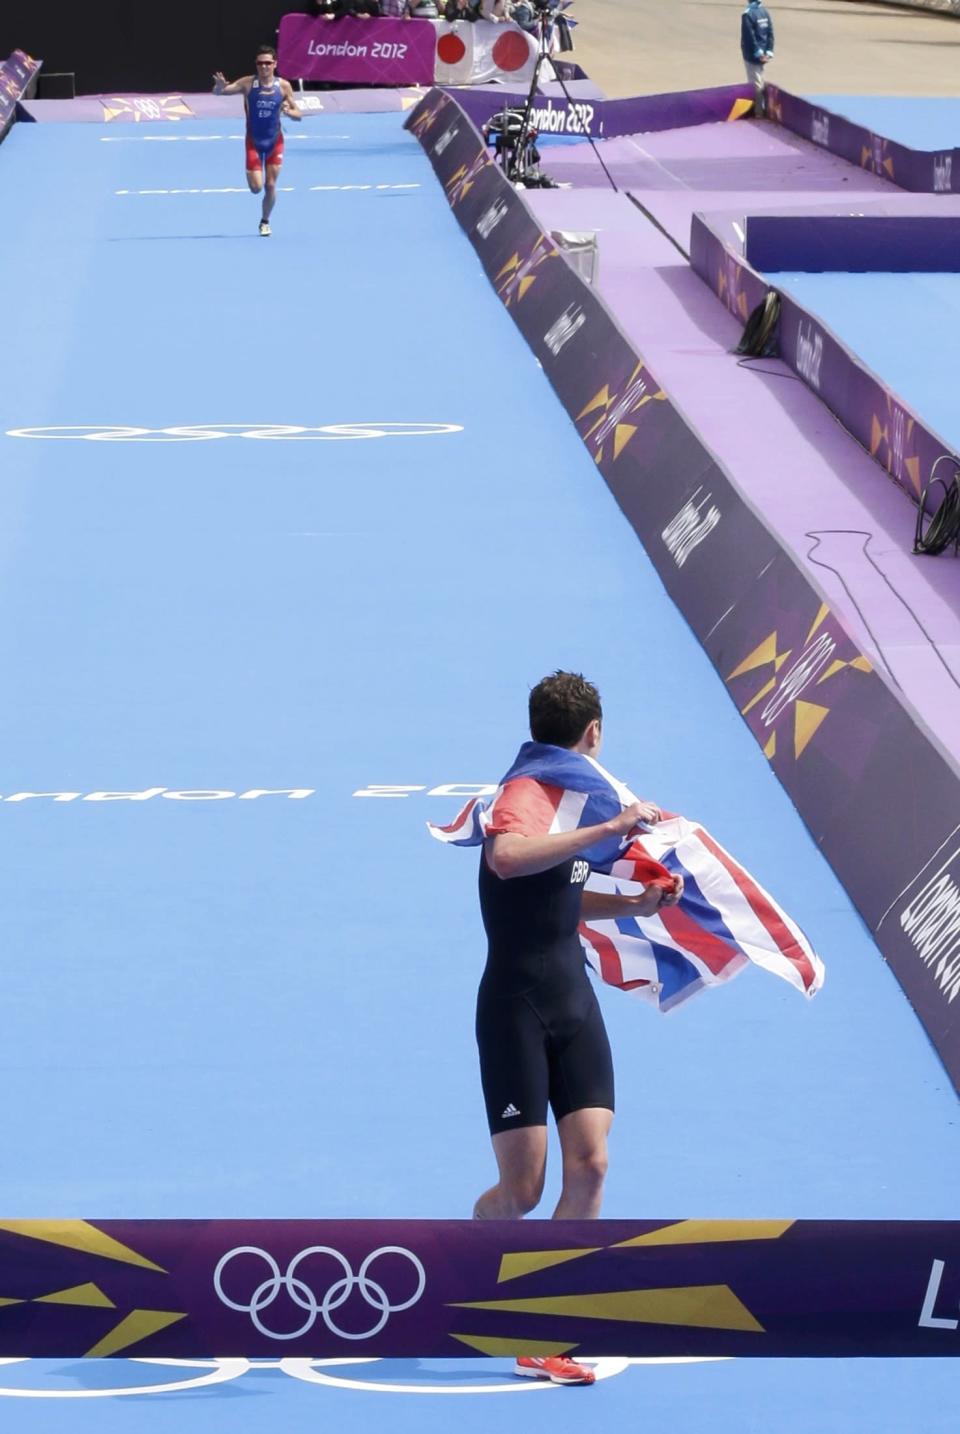 Britain's Alistair Brownlee looks back on finish line at Spain's Javier Gomez in the men's triathlon final during the London 2012 Olympic Games at Hyde Park August 7, 2012. REUTERS/Tim Wimborne (BRITAIN - Tags: OLYMPICS SPORT TRIATHLON TPX IMAGES OF THE DAY) 